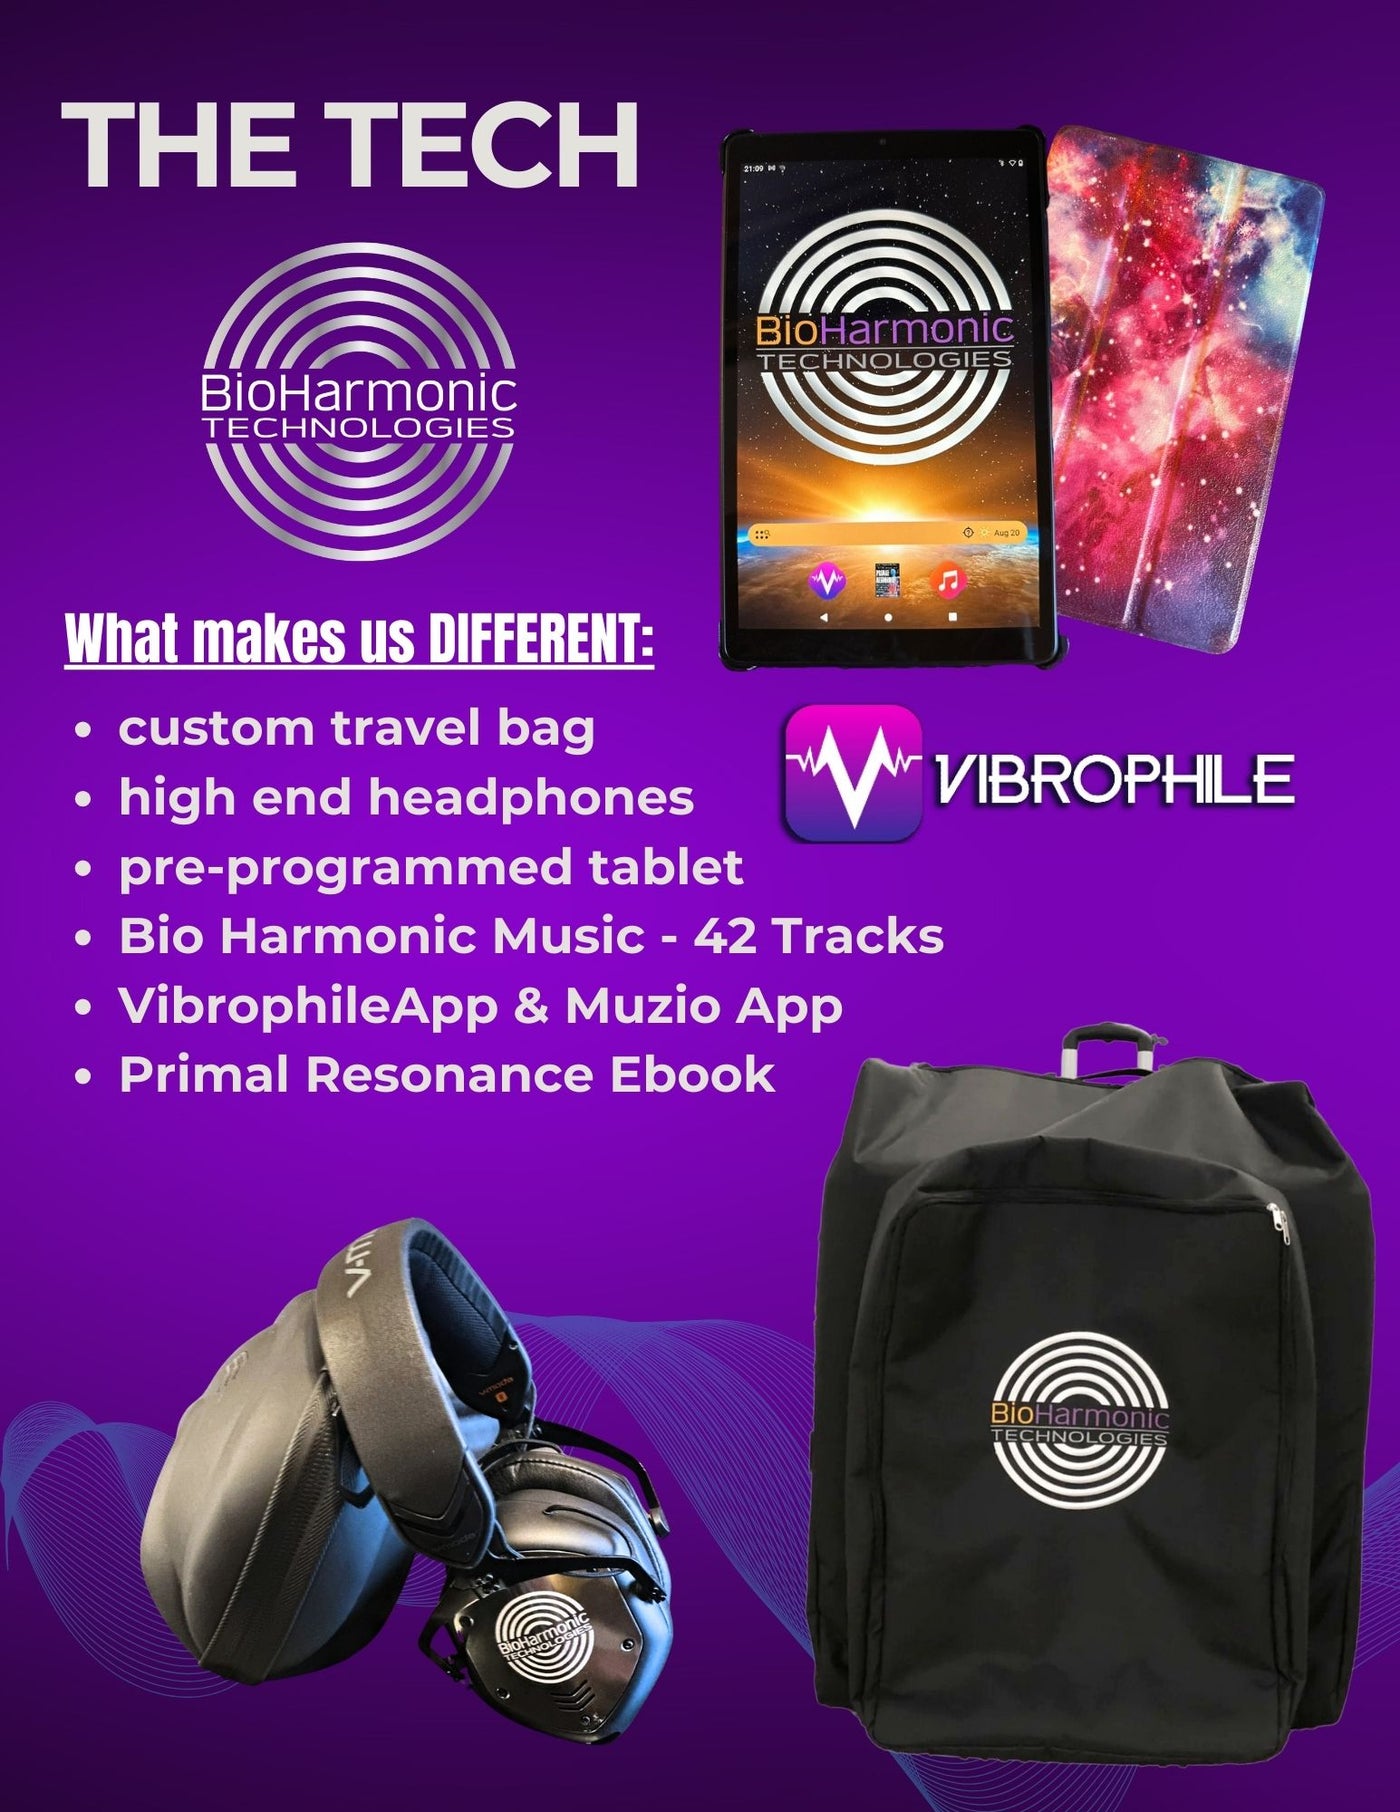 VIBE 3.1 - Sound Therapy System